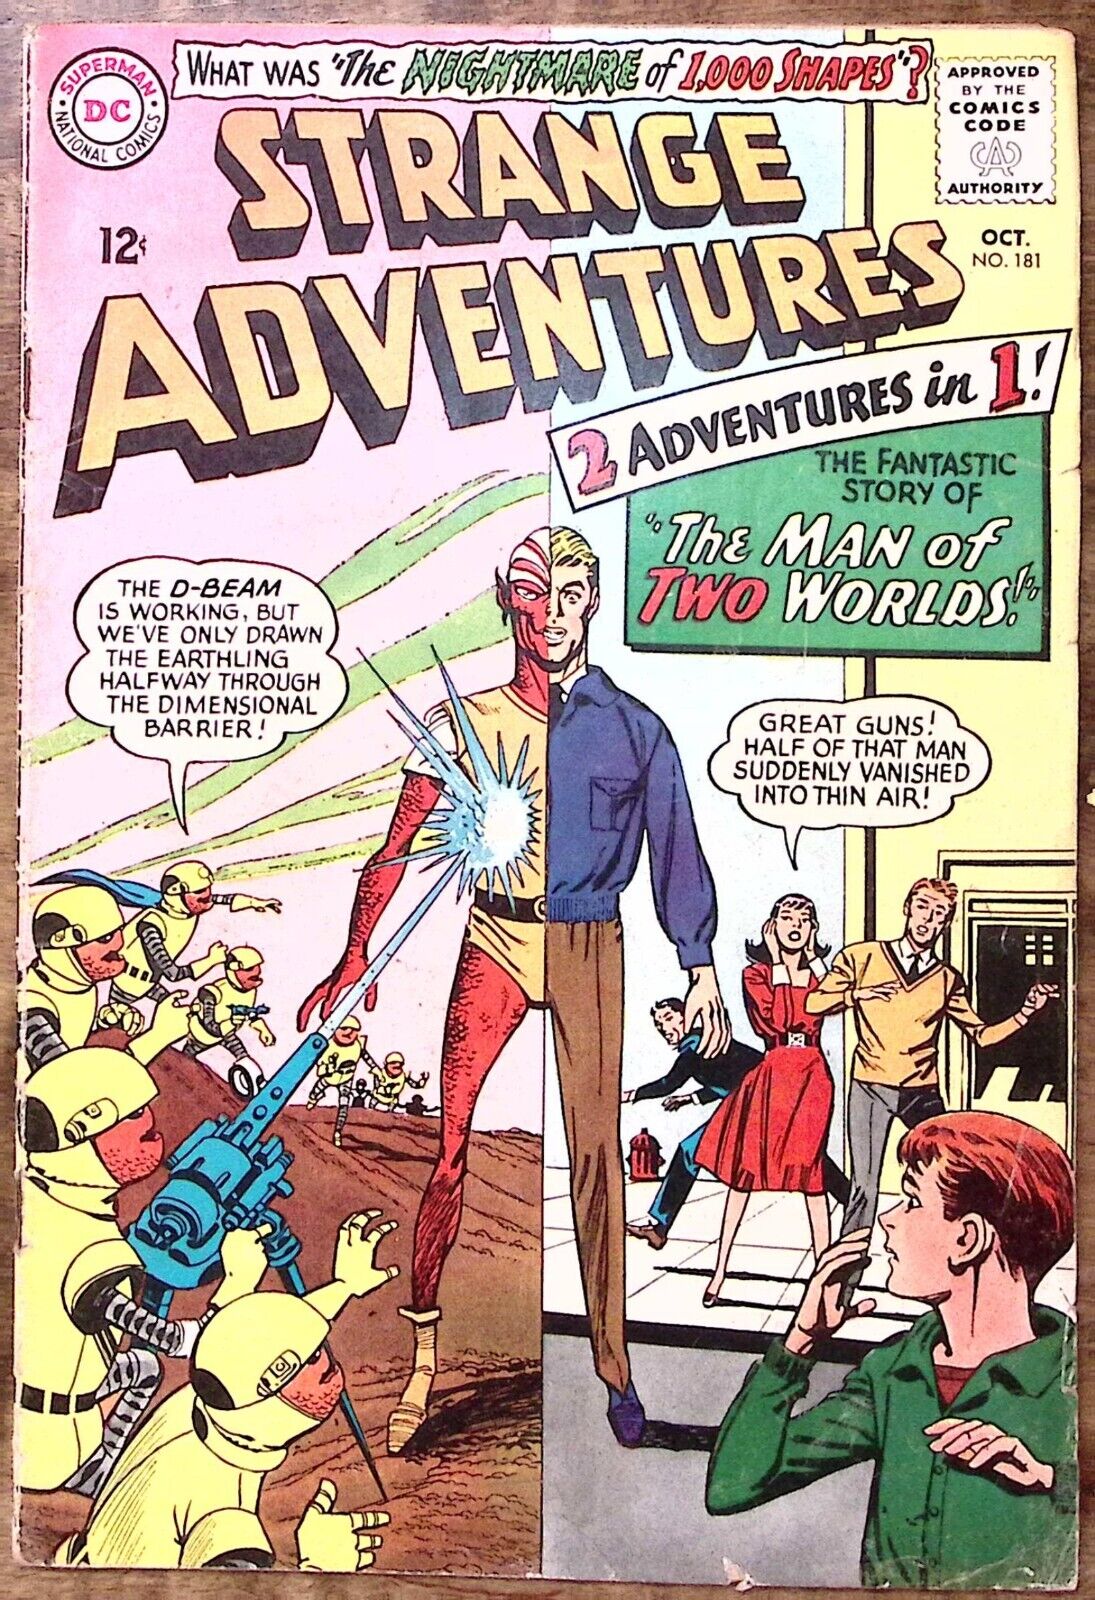 STRANGE ADVENTURES 1965 OCT #181 THE MAN OF TWO WORLDS DC COMICS  Z2815